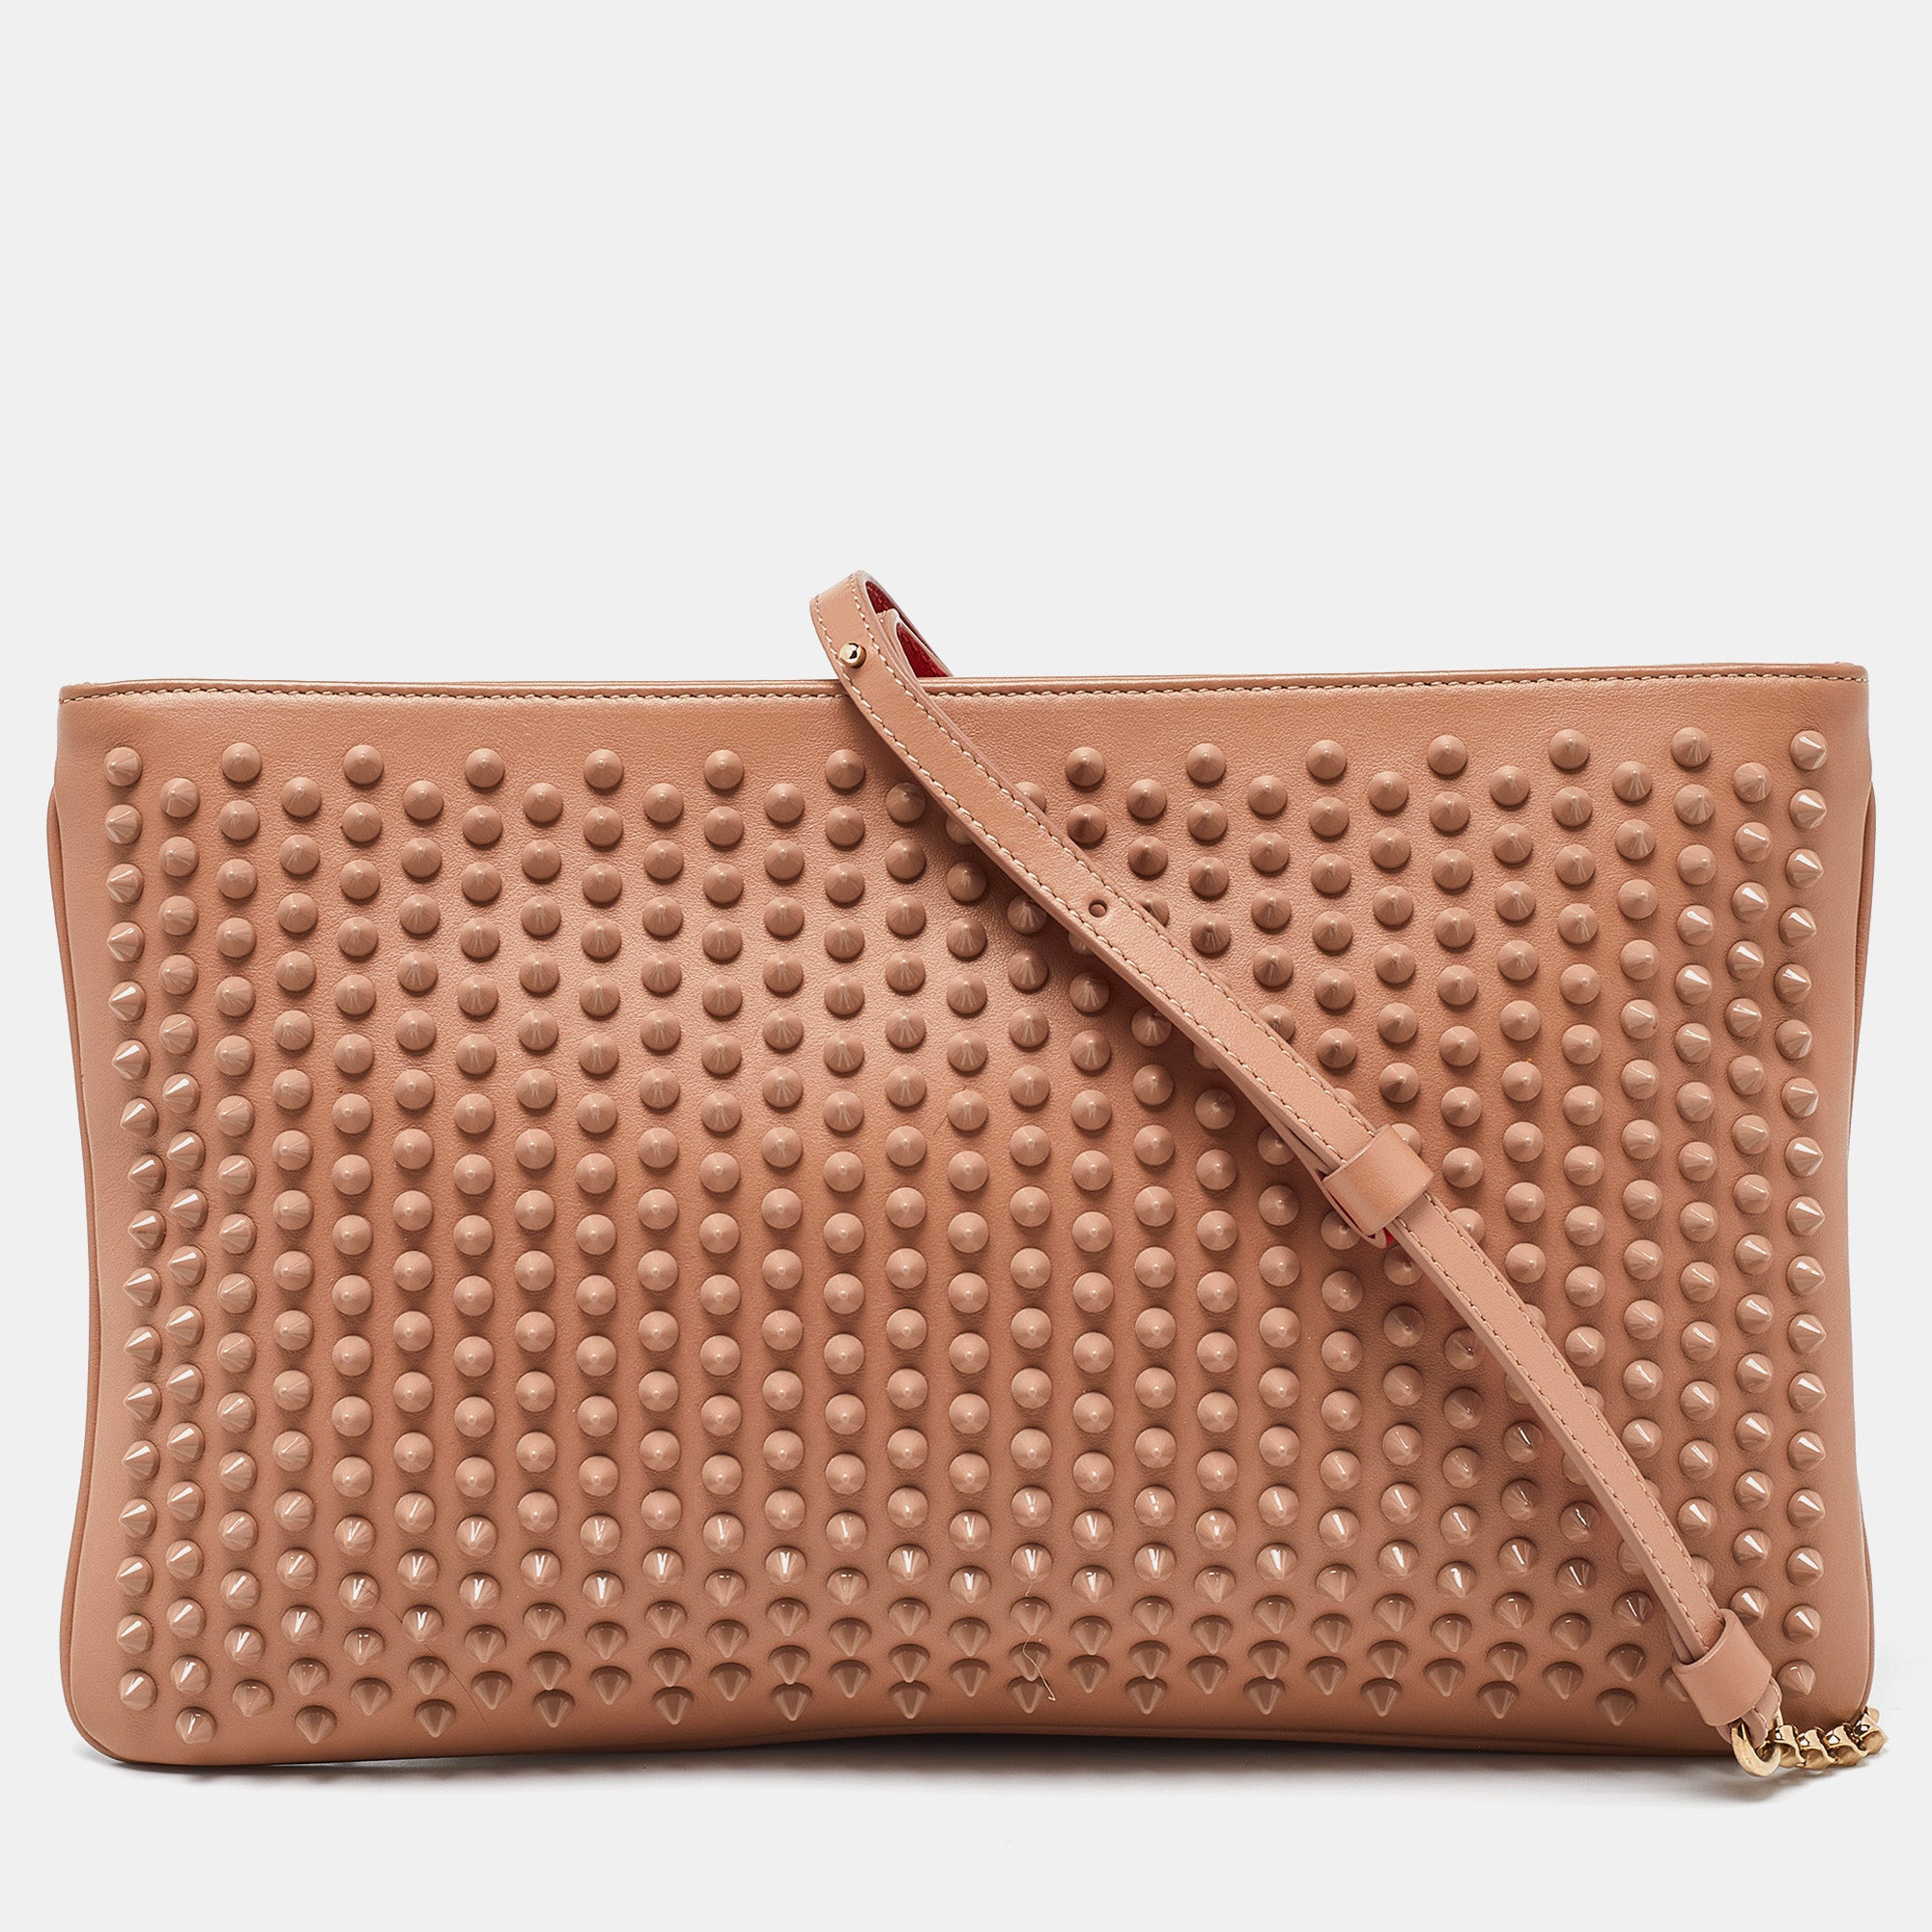 Christian Louboutin Leather Triloubi Spiked Shoulder Bag In Brown